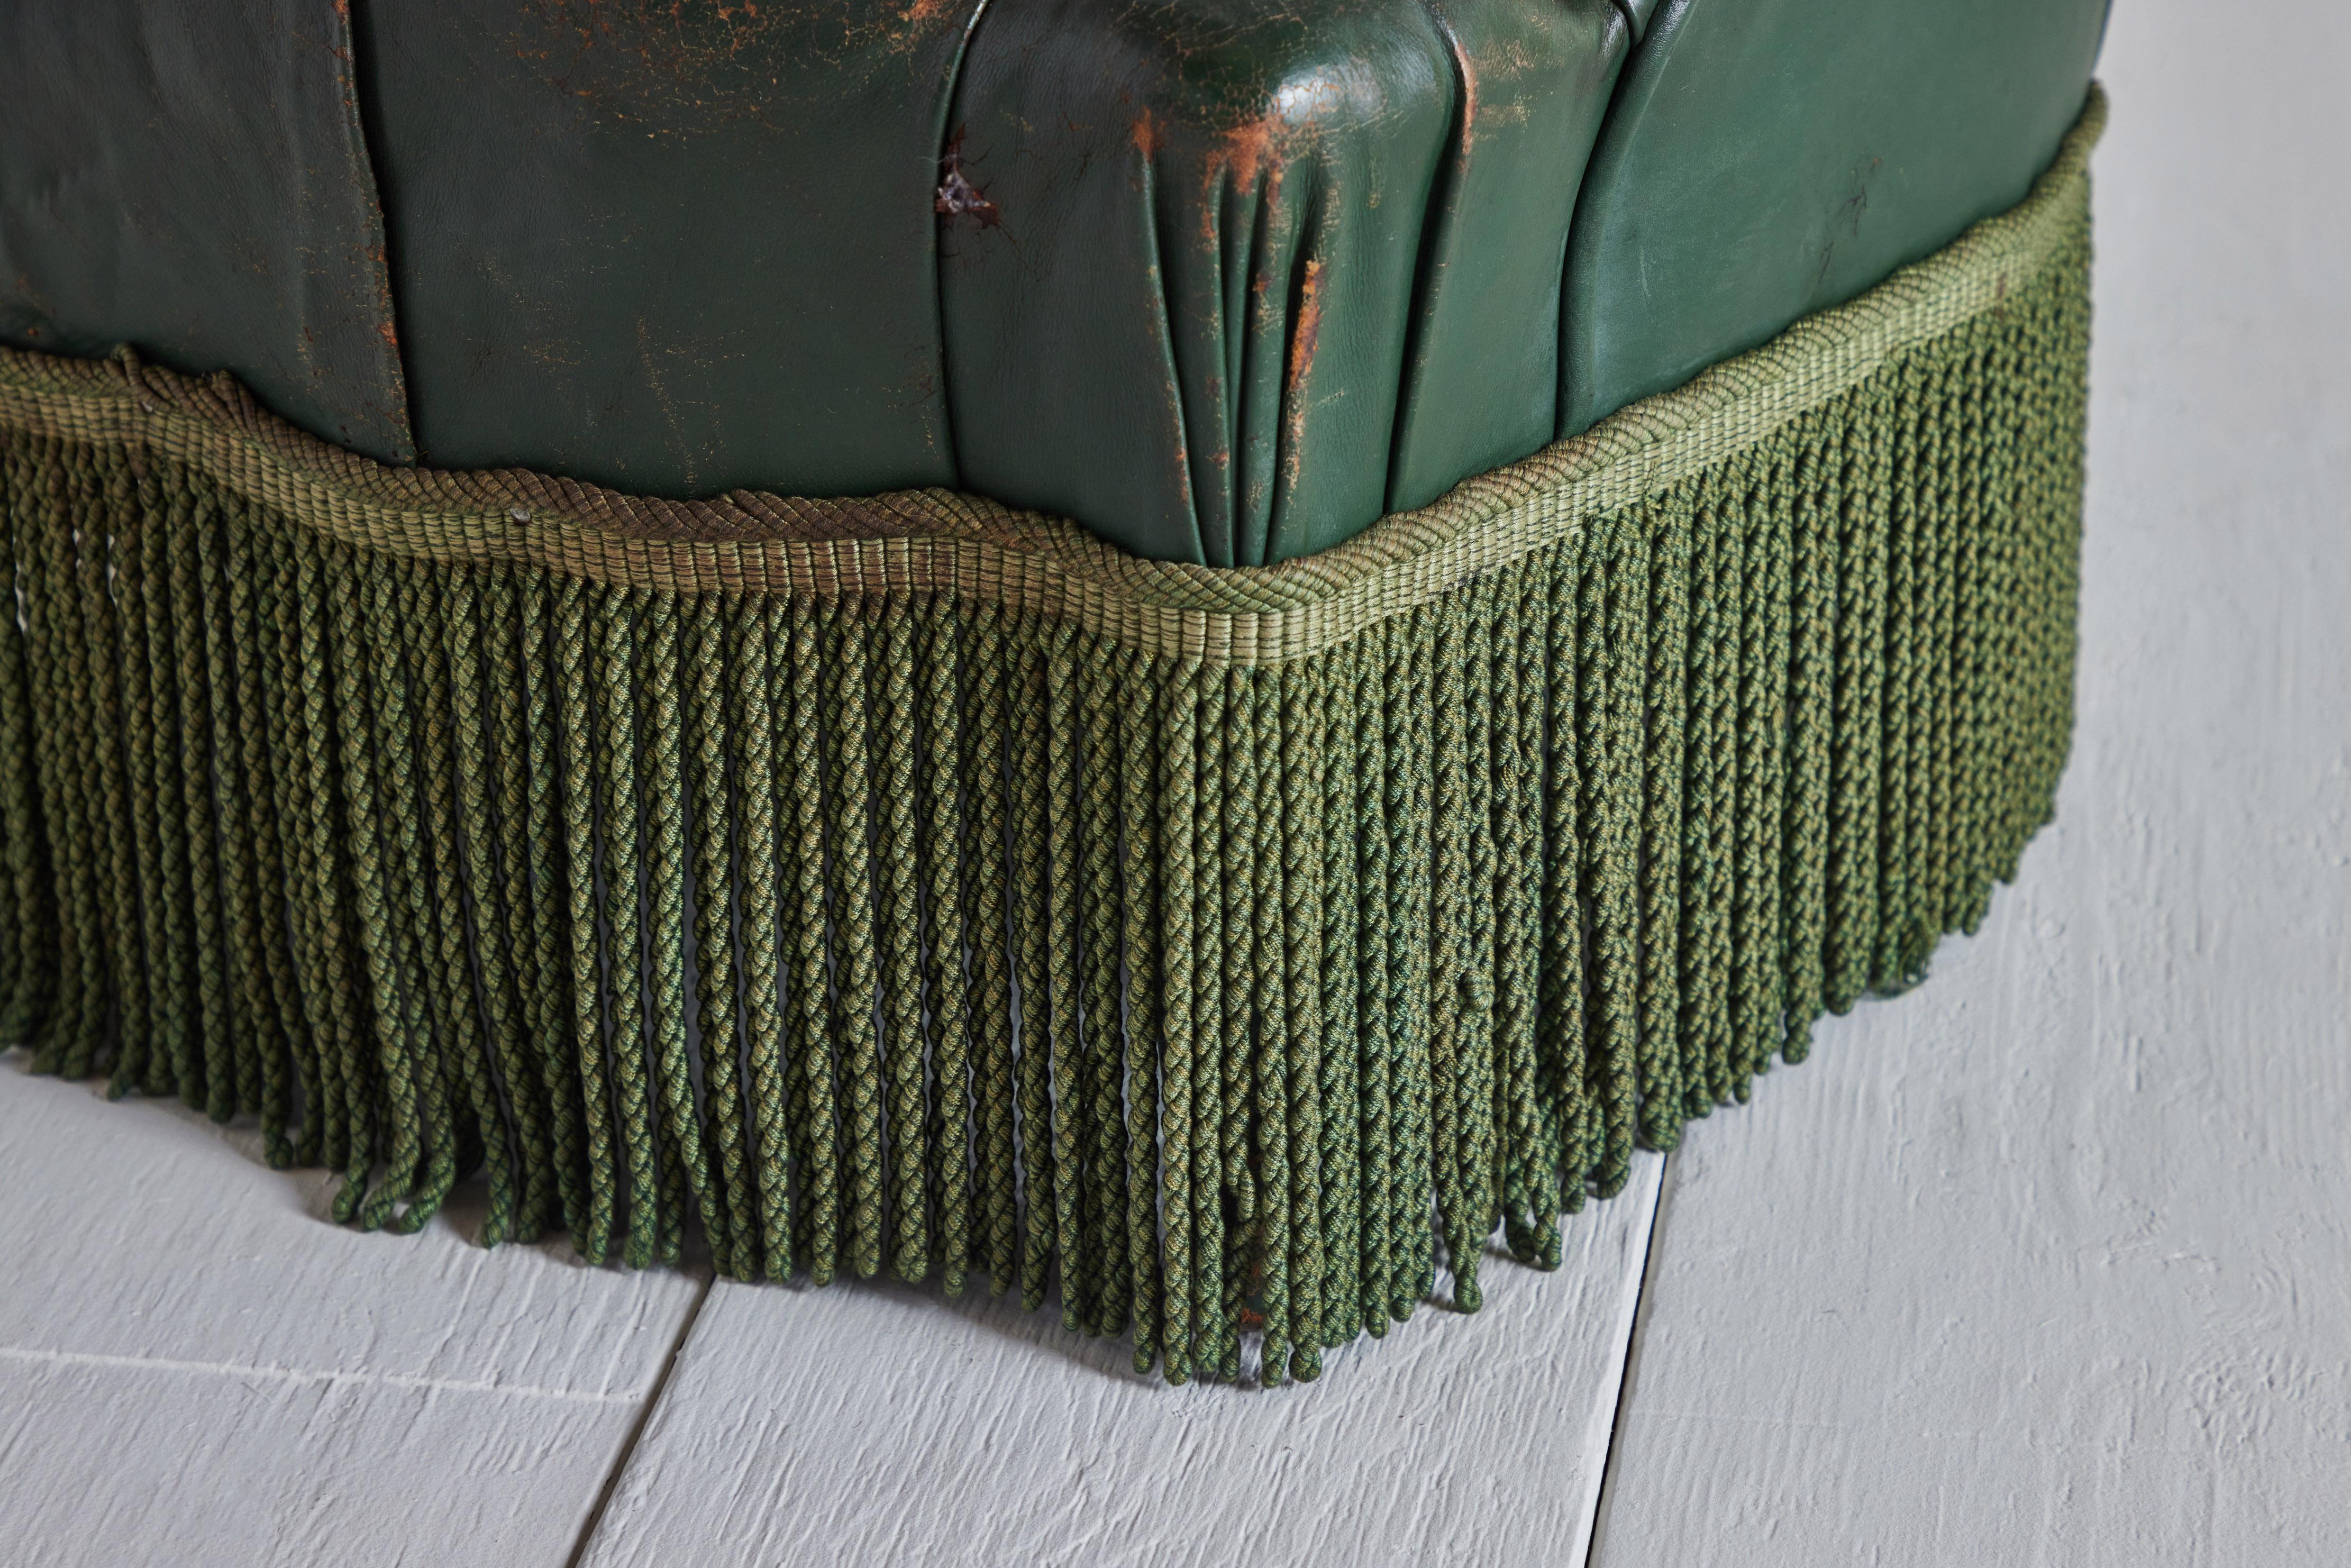 Green tufted leather and silk fringe fireside chair from France circa 1900. Leather has heavy wear that is consistent with age and use.